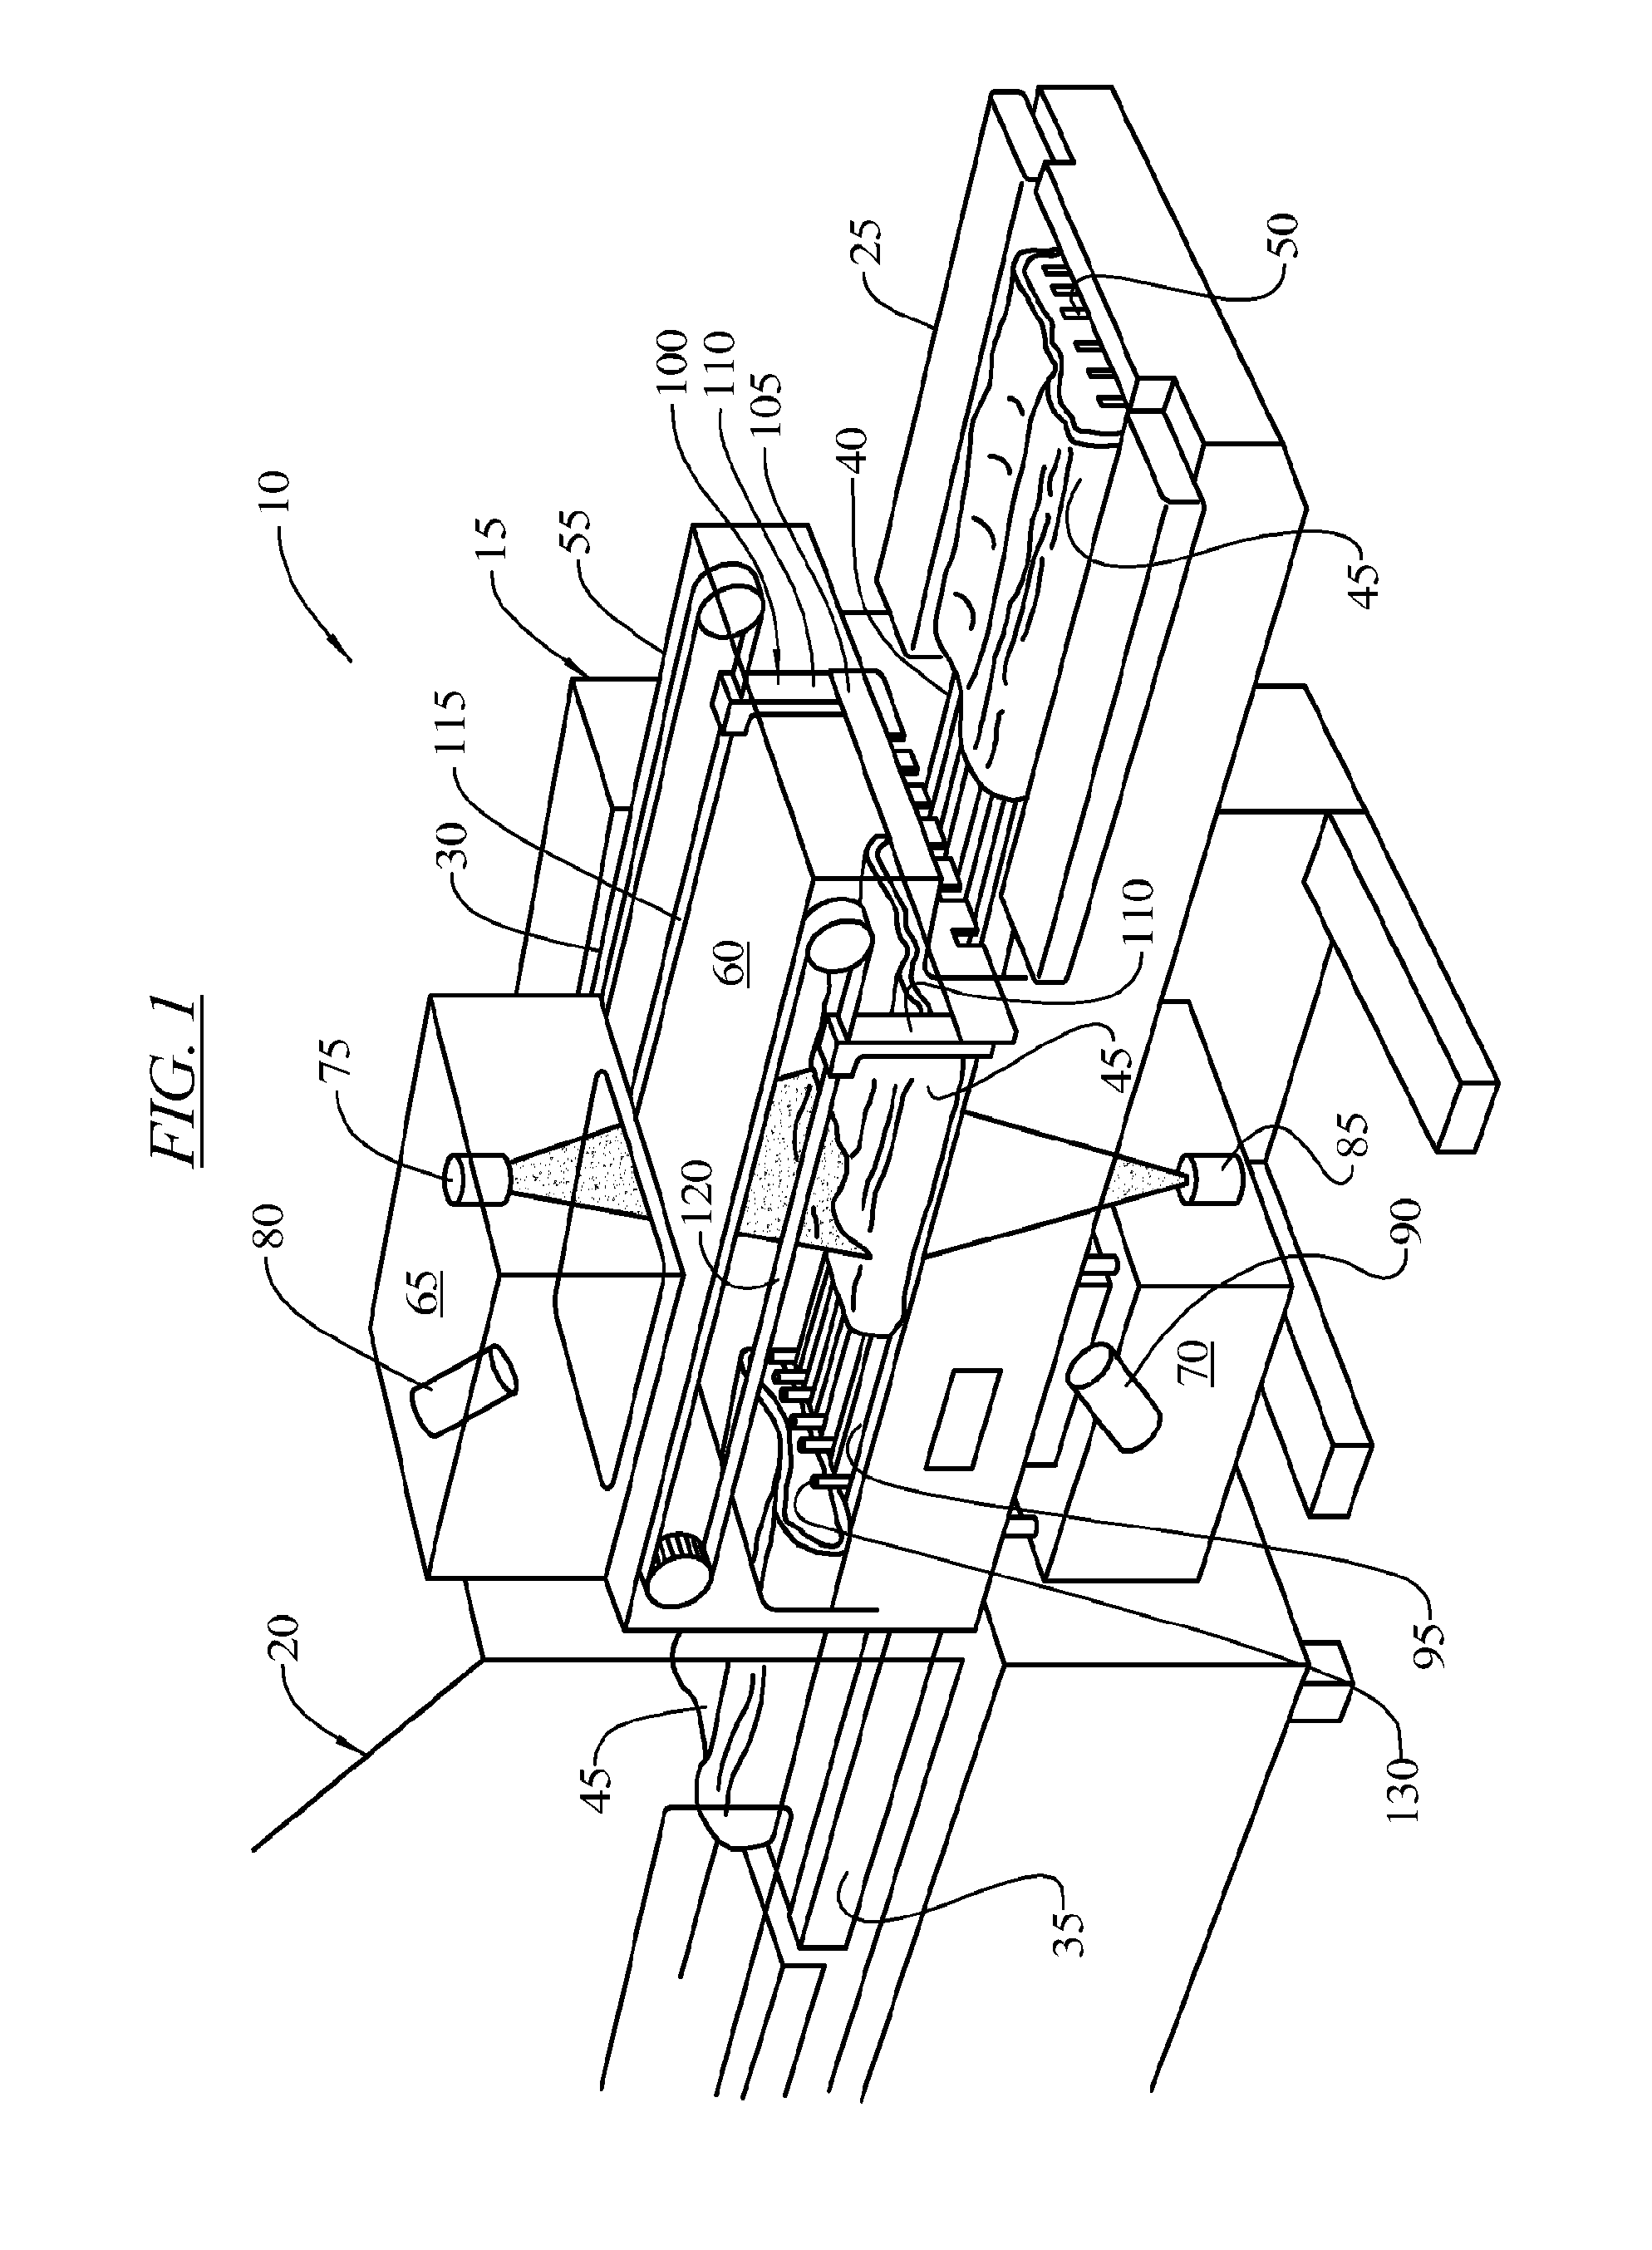 Automated Product Profiling Apparatus and Product Slicing System Using the Same